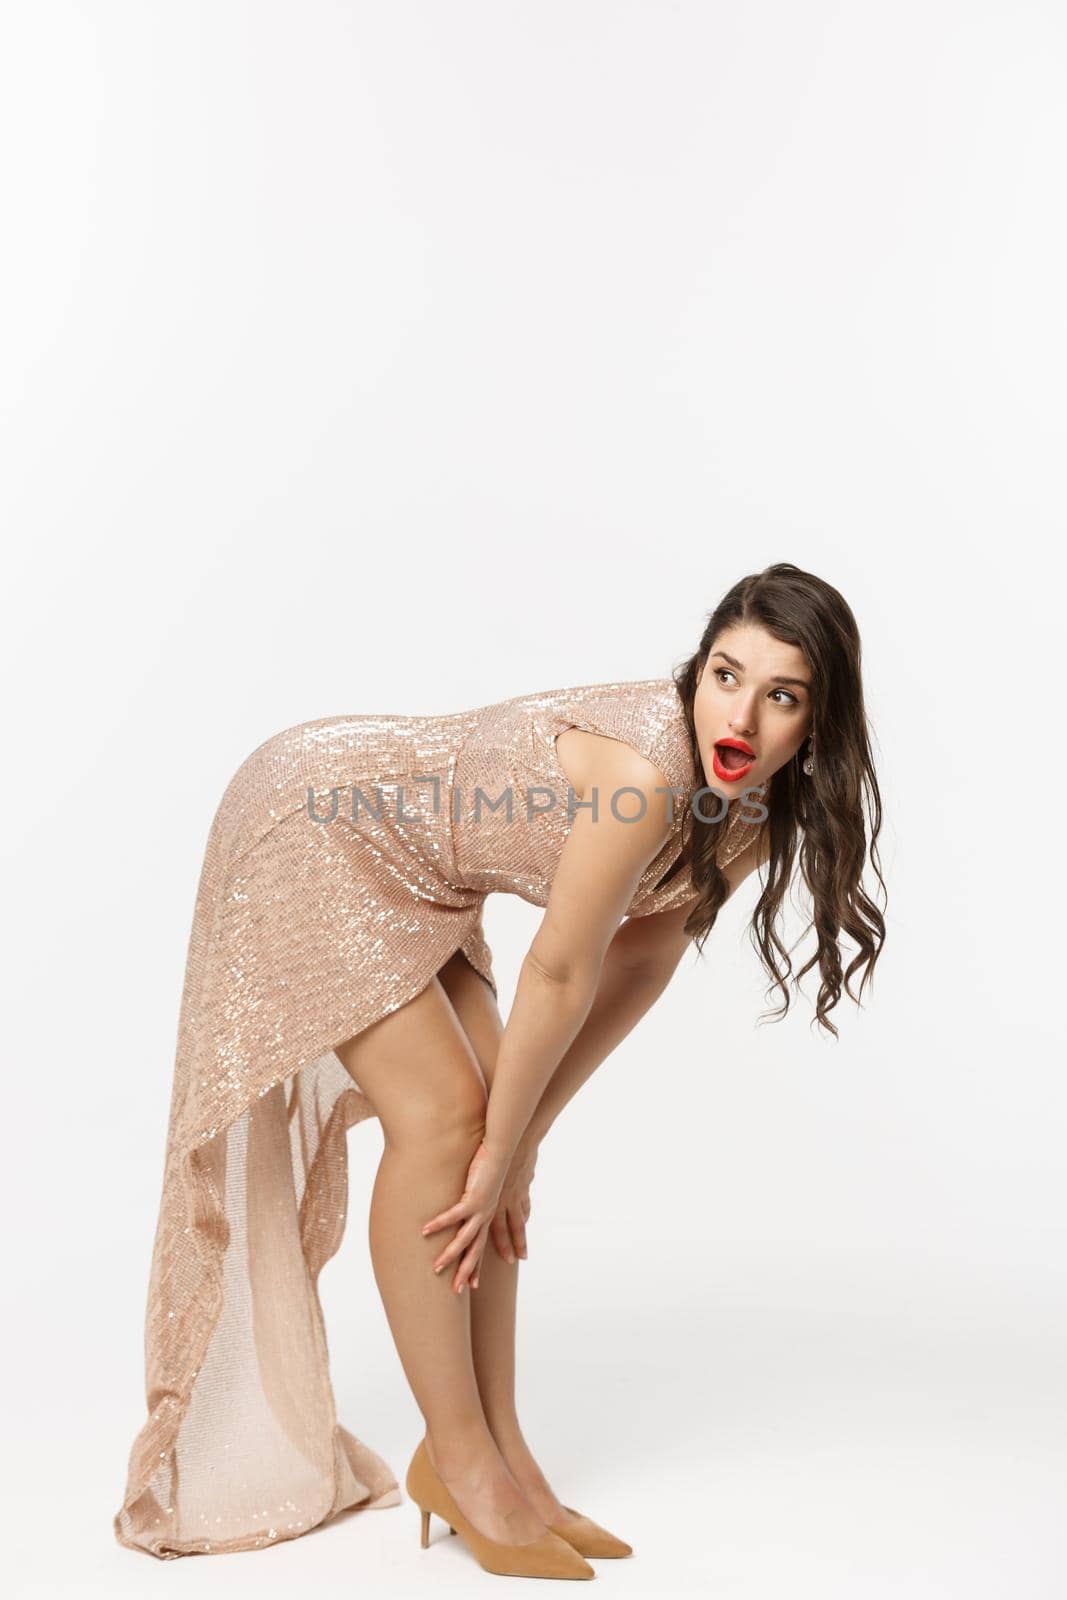 Christmas party and celebration concept. Full length of sensual brunette in luxury dress, bend down and looking left with surprised face, white background.